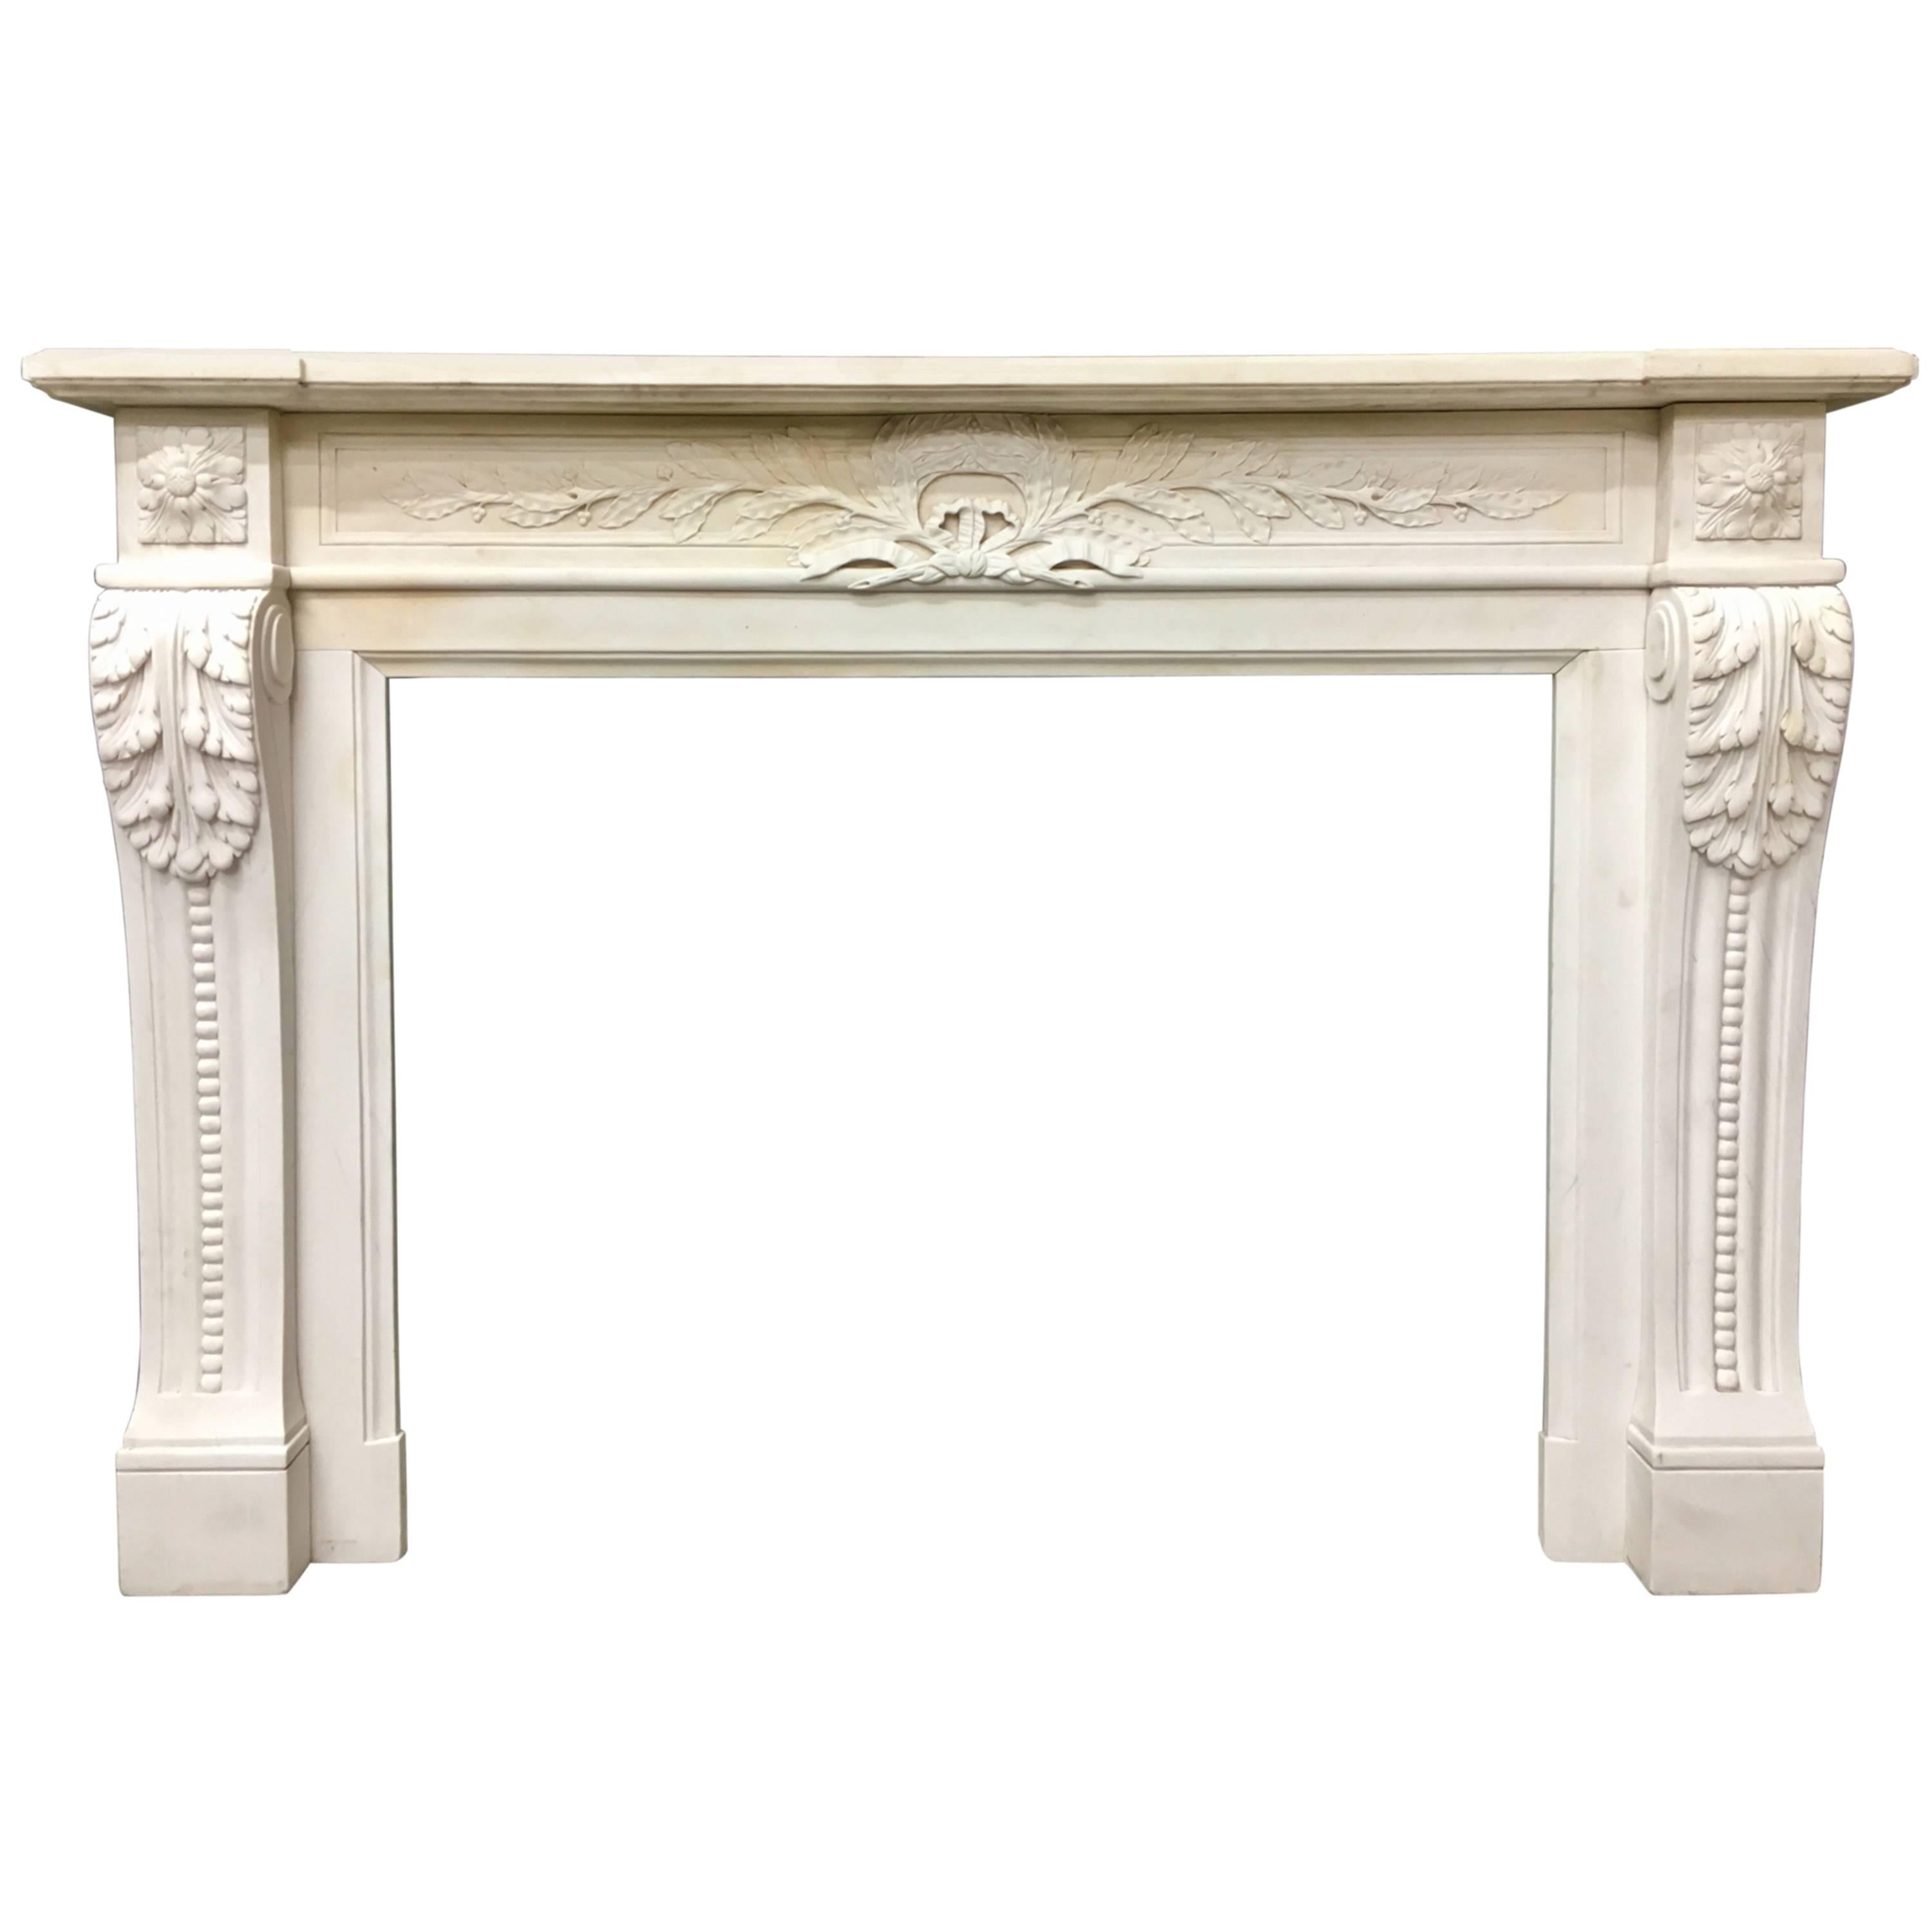 Period Statuary Marble Fireplace Surround